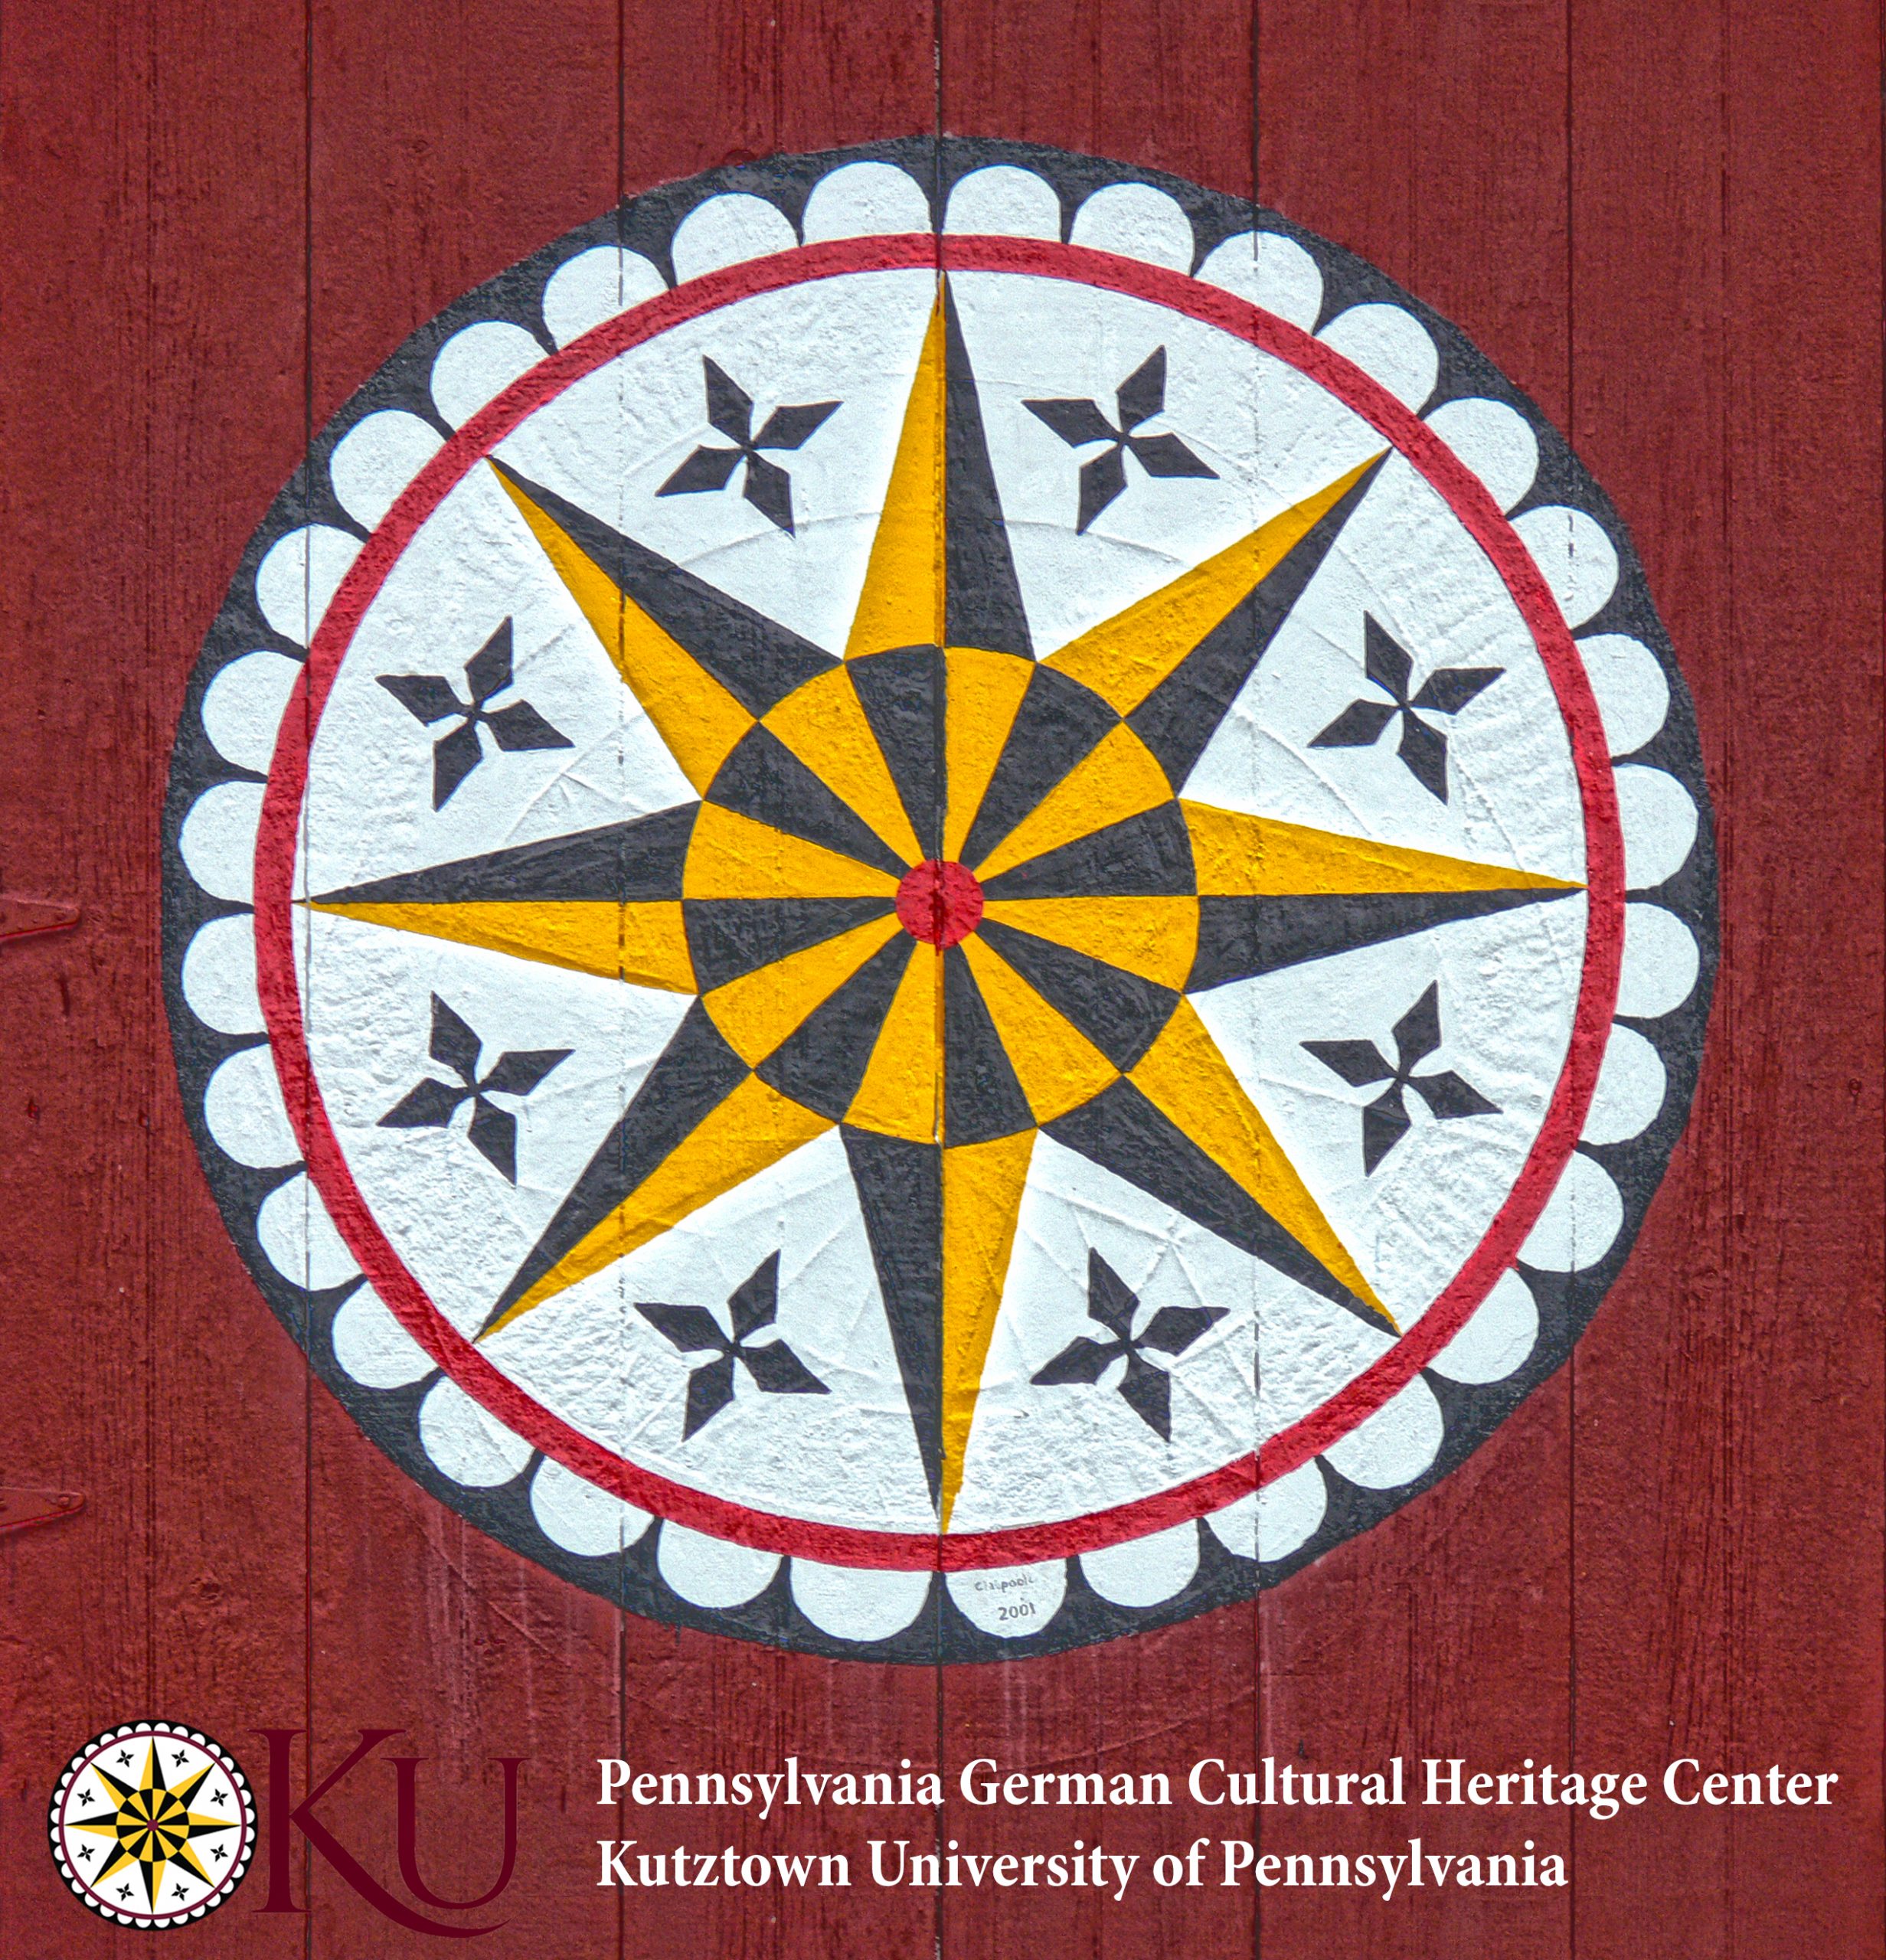 An 8-pointed yellow and black star is surrounded by 8 4-pointed stars on a white background. These symbols are surrounded by a red line and a black and white scalloped bordered circle. This barn star is painted on red barn siding.